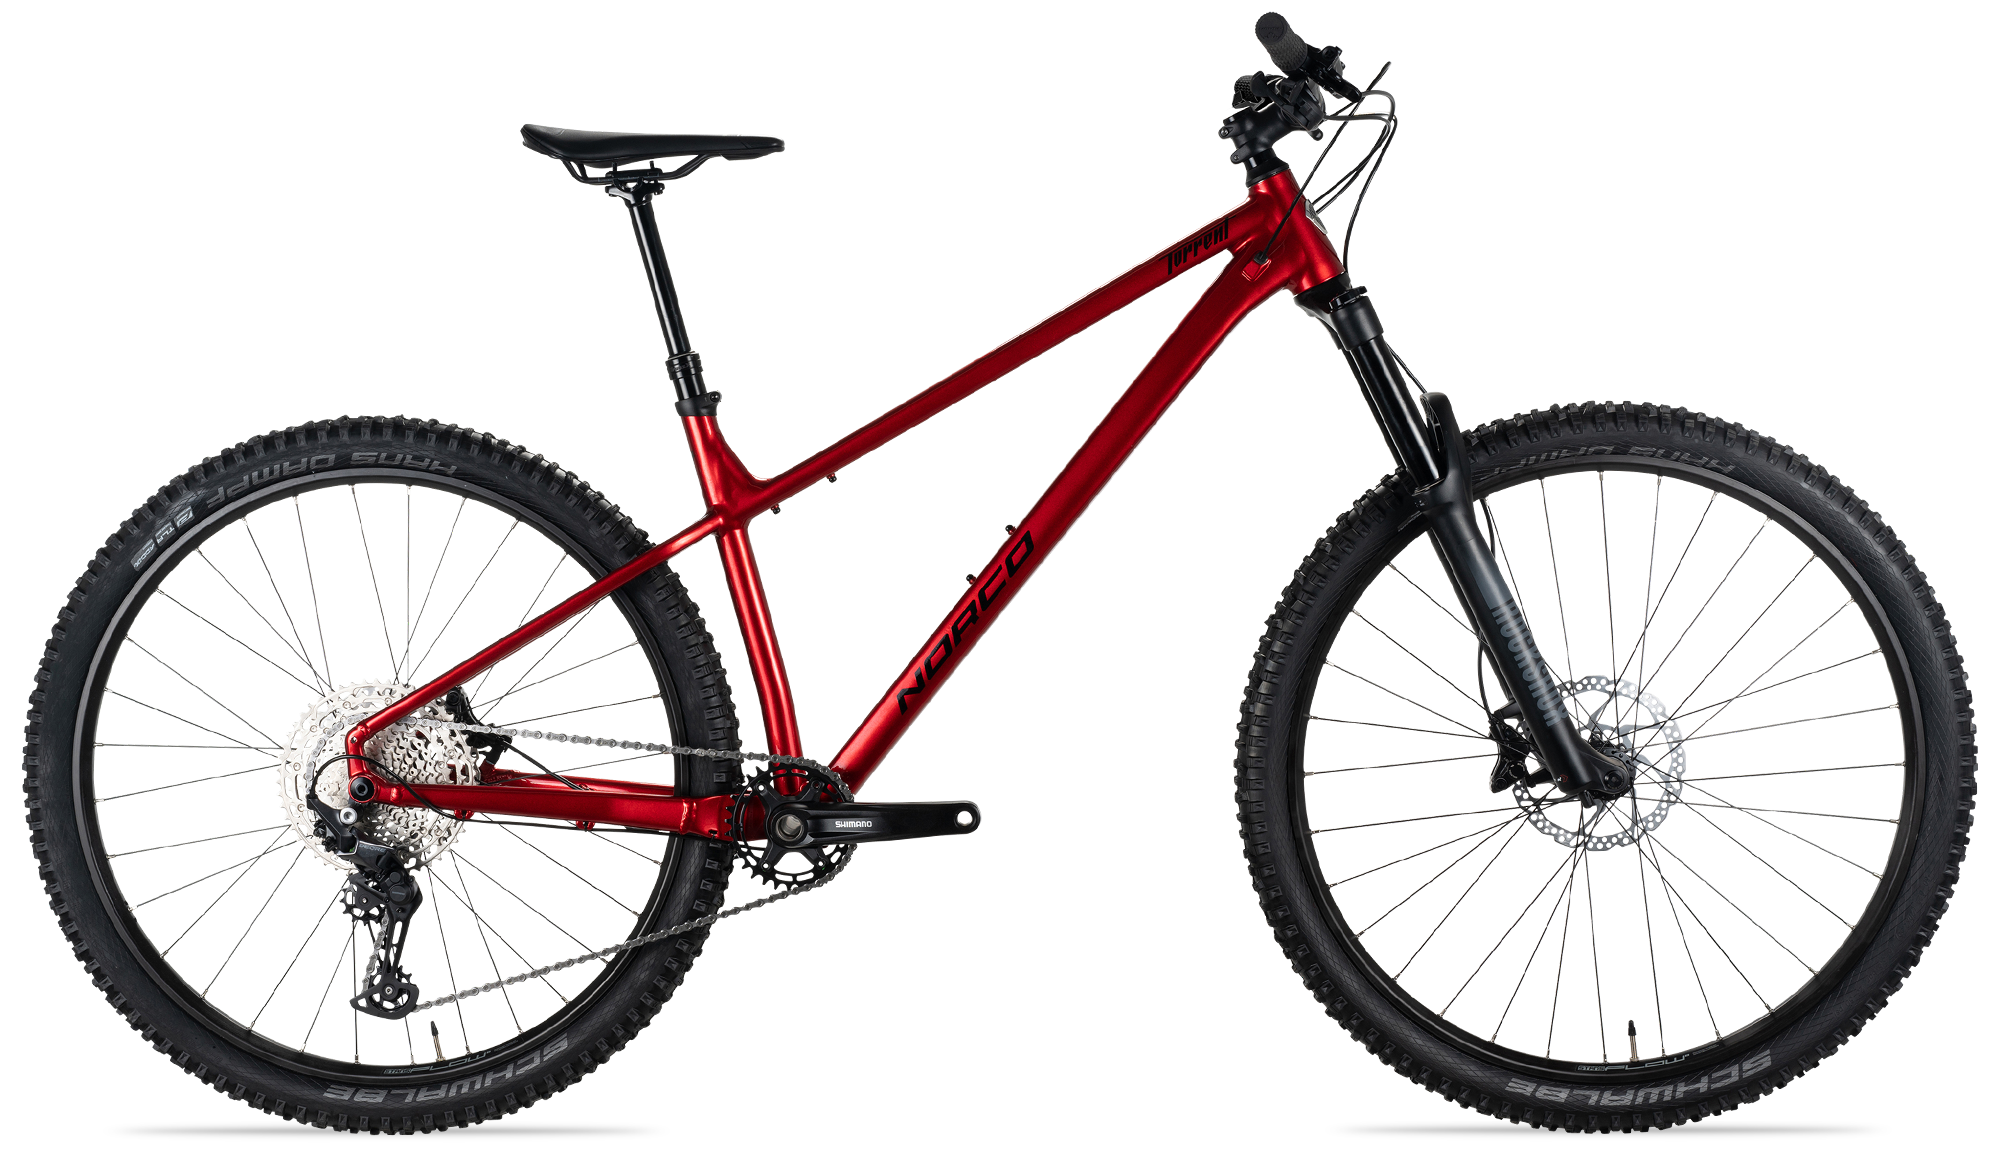 2021 Torrent Hardtail A1